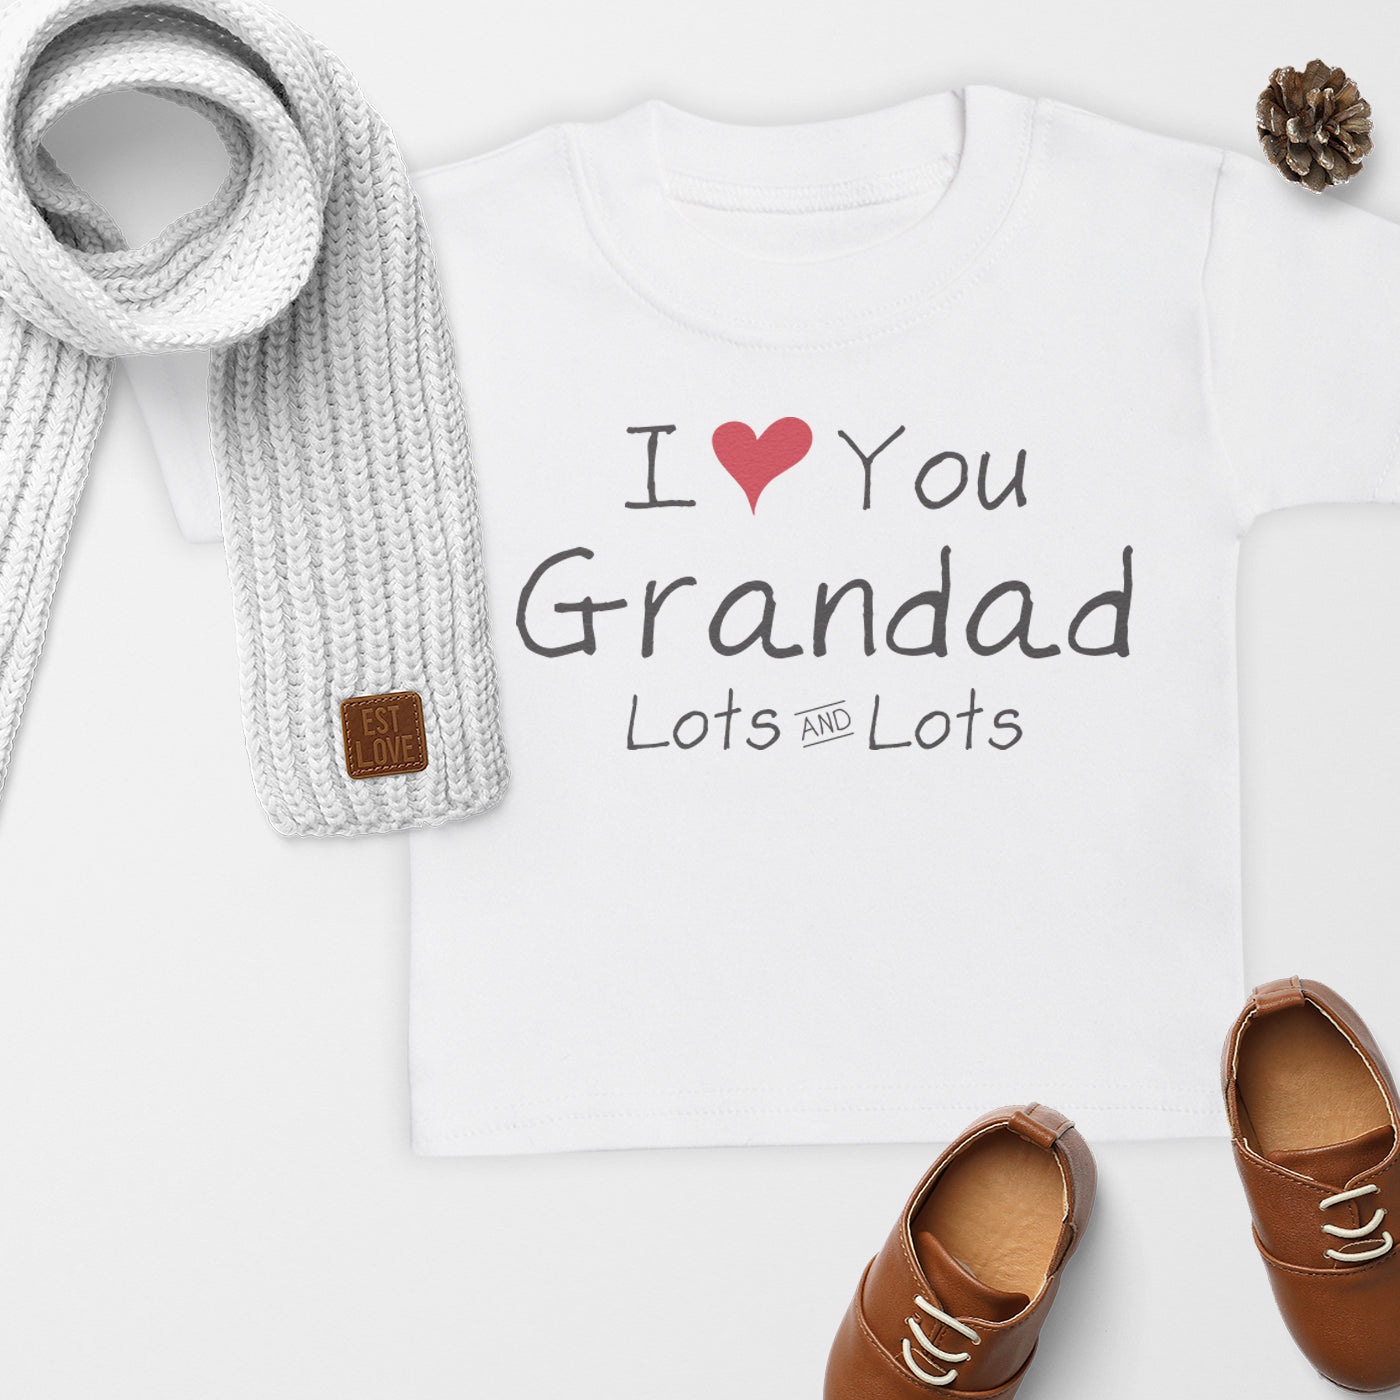 Pick A Family Name - I Love Mummy, Auntie, Grandad and more Lots - Baby & Kids T-Shirt